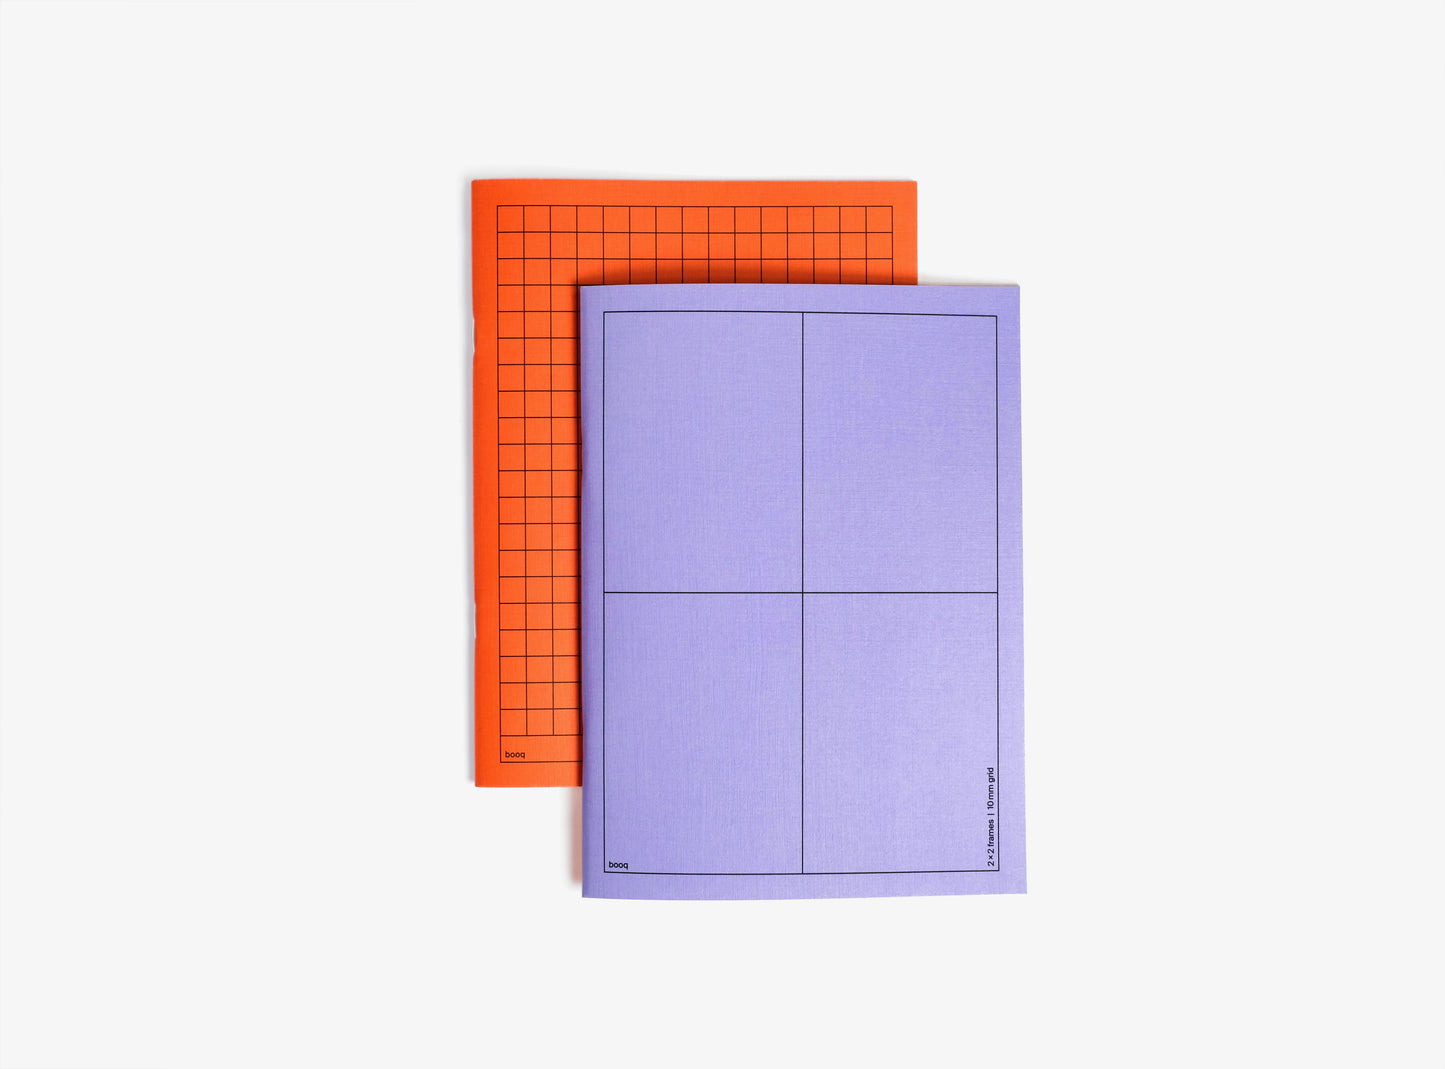 booq / a double-sided notebook - Style A: 2x2 frames | 10 mm grid